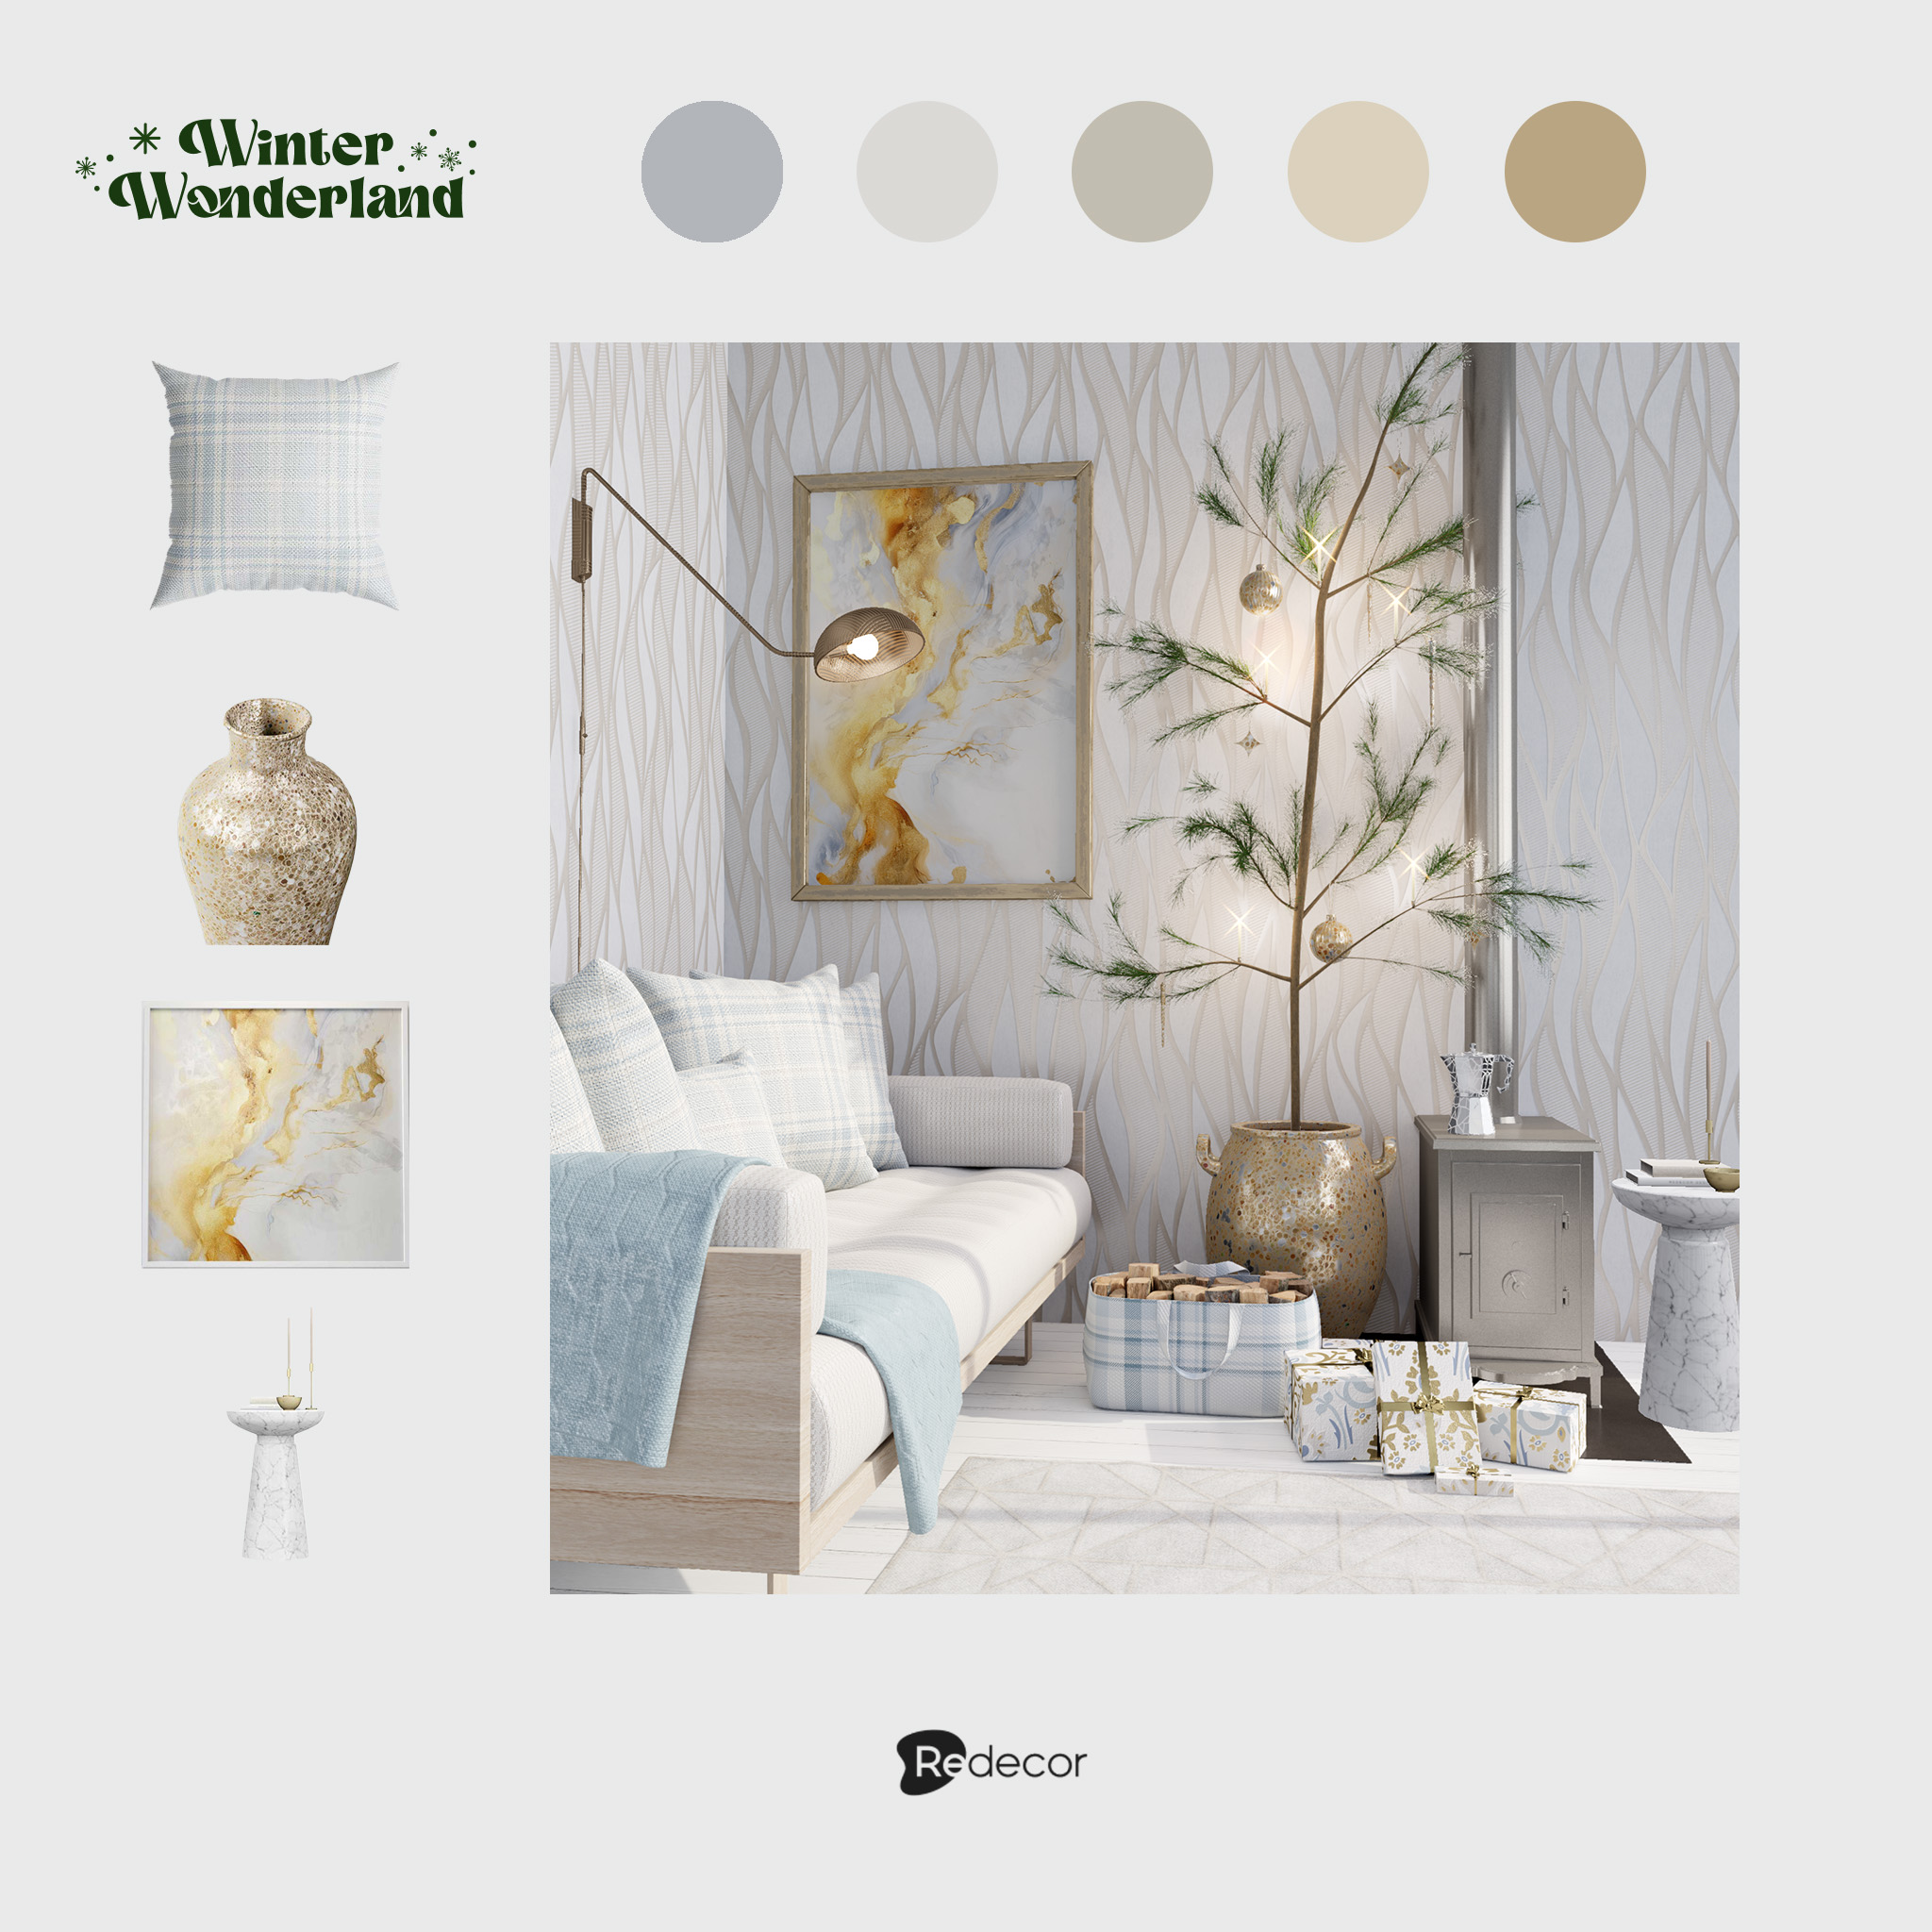 a page out of the redecor inspiration catalog of a living room in the winter wonderland style